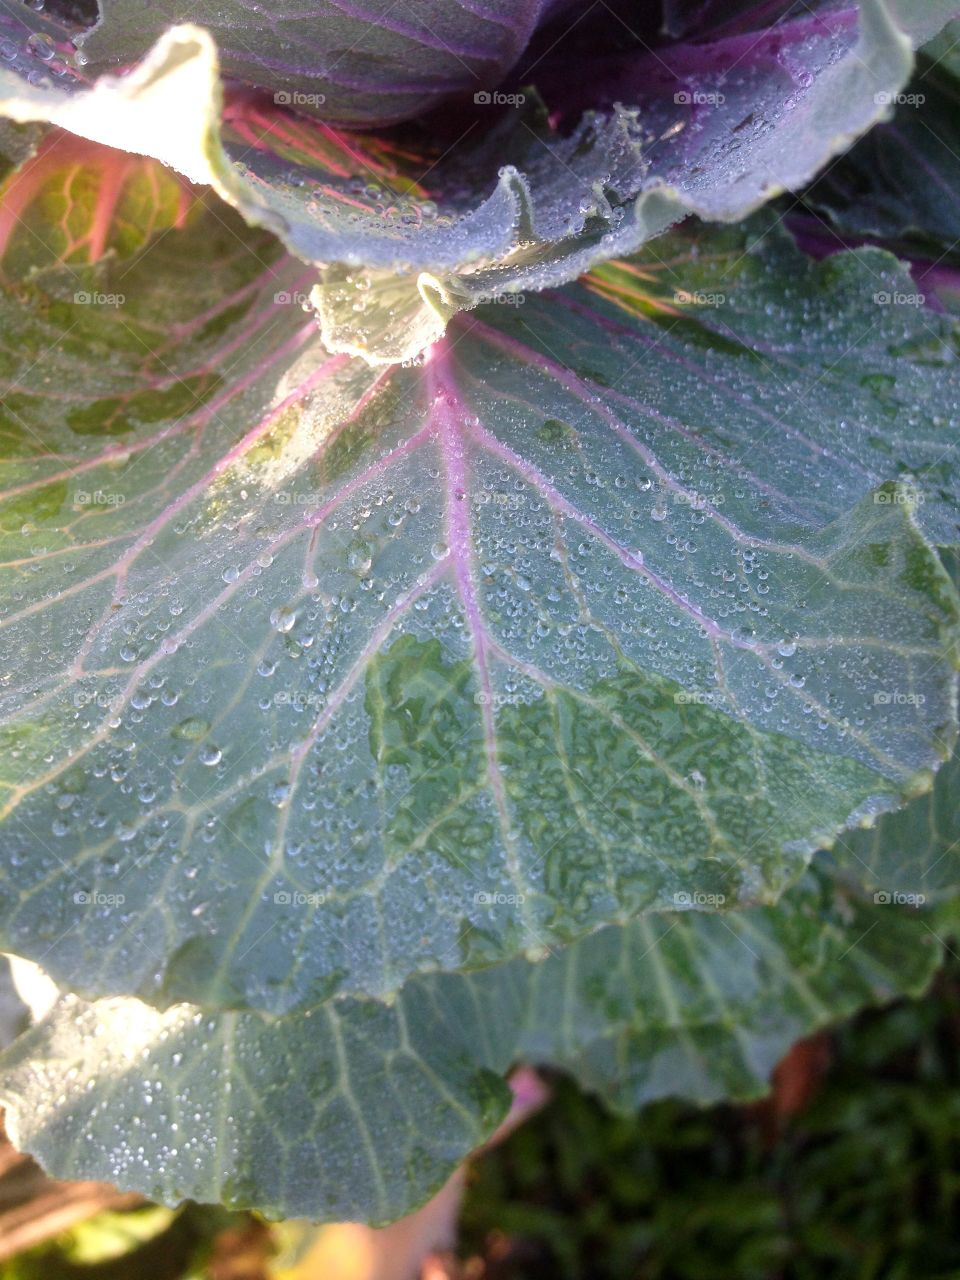 Dewdrop on the cabbage